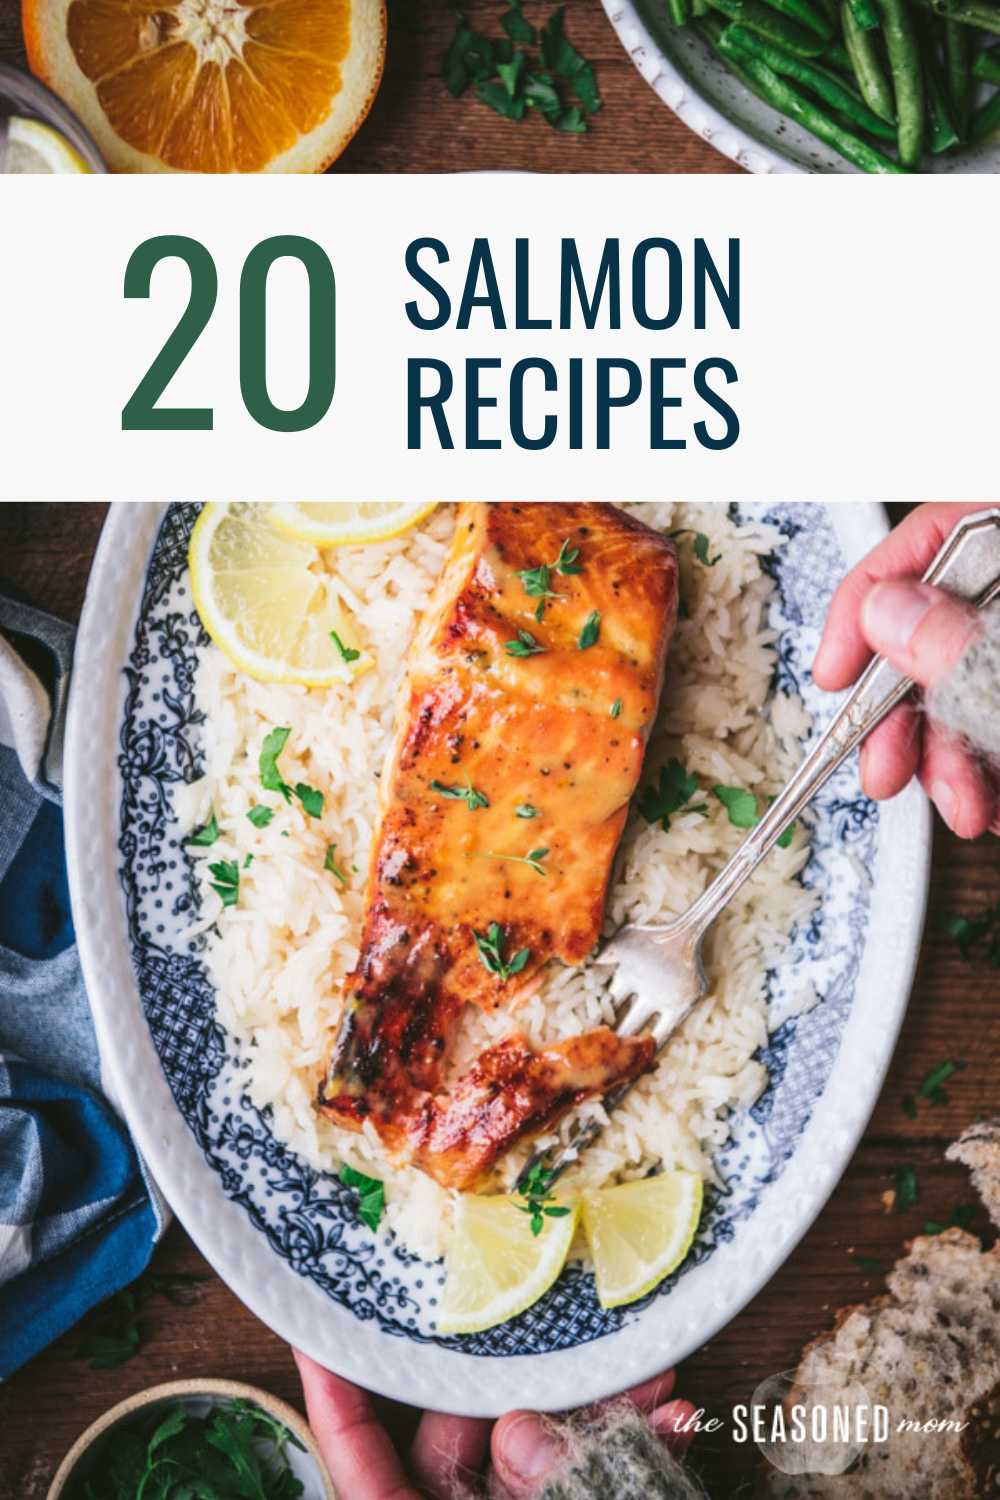 The best salmon recipes image with text title overlay